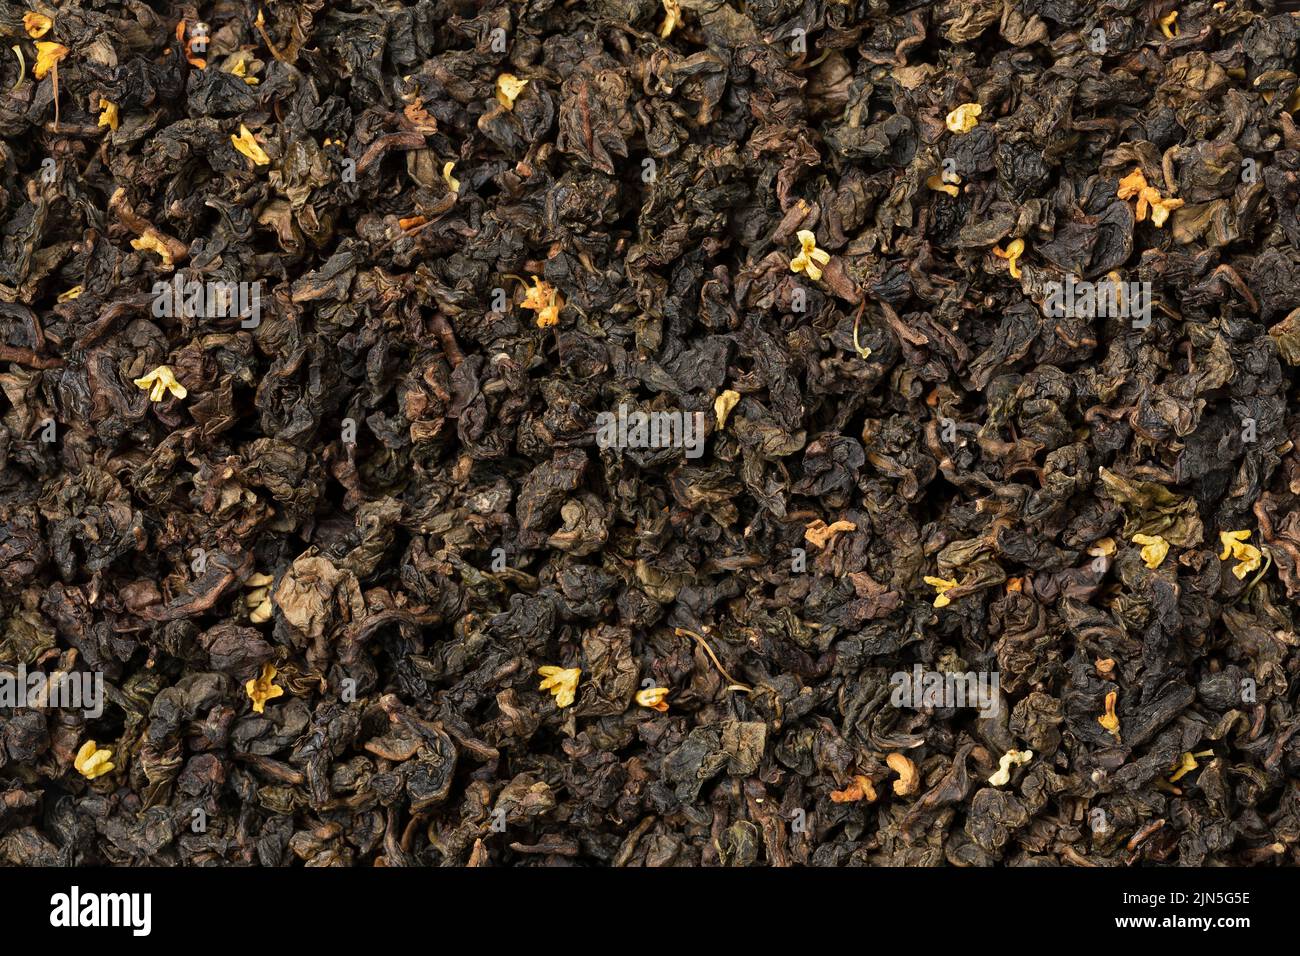 Gui hua Osmanthus dried tea leaves full frame as background close up Stock Photo